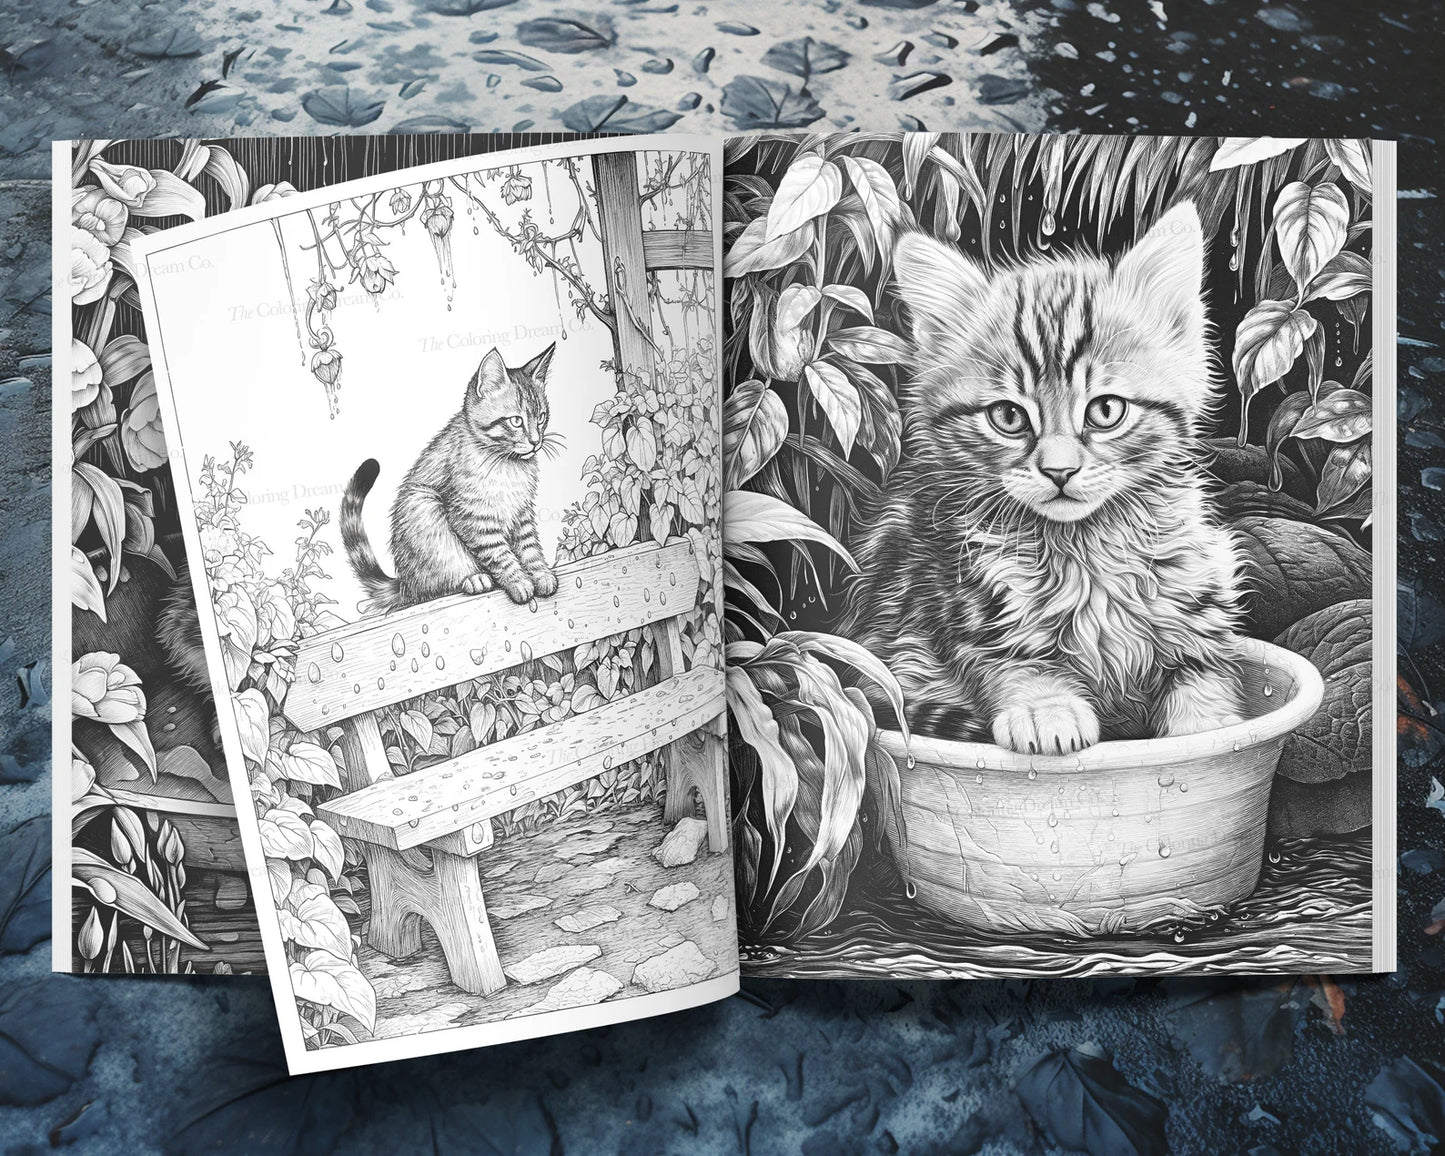 Rainy Day Kitty Coloring Book, Kittens & Cats, Printable Coloring Pages PDF